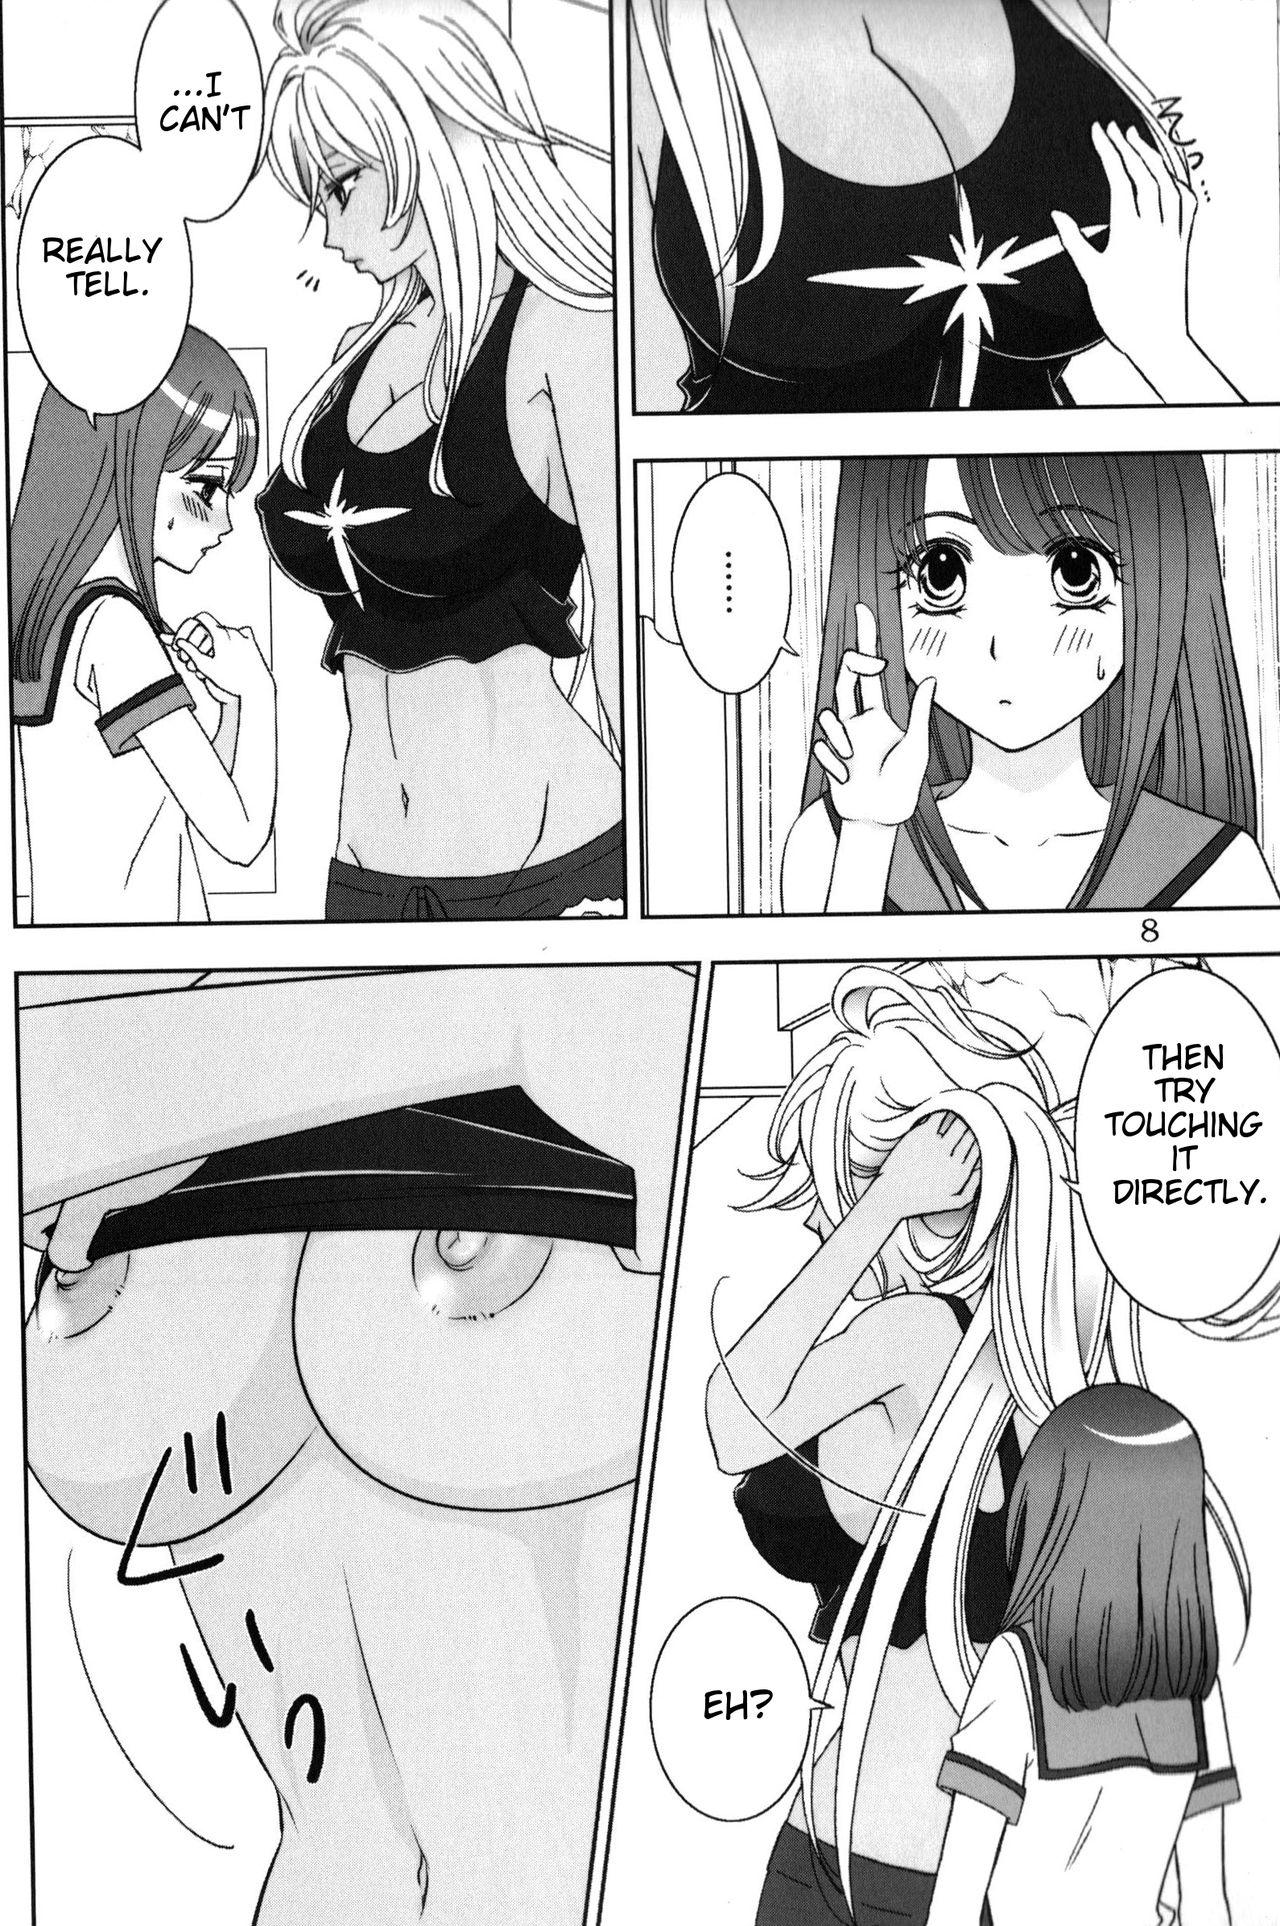 Staxxx Give it Away - Valkyrie drive Korea - Page 7